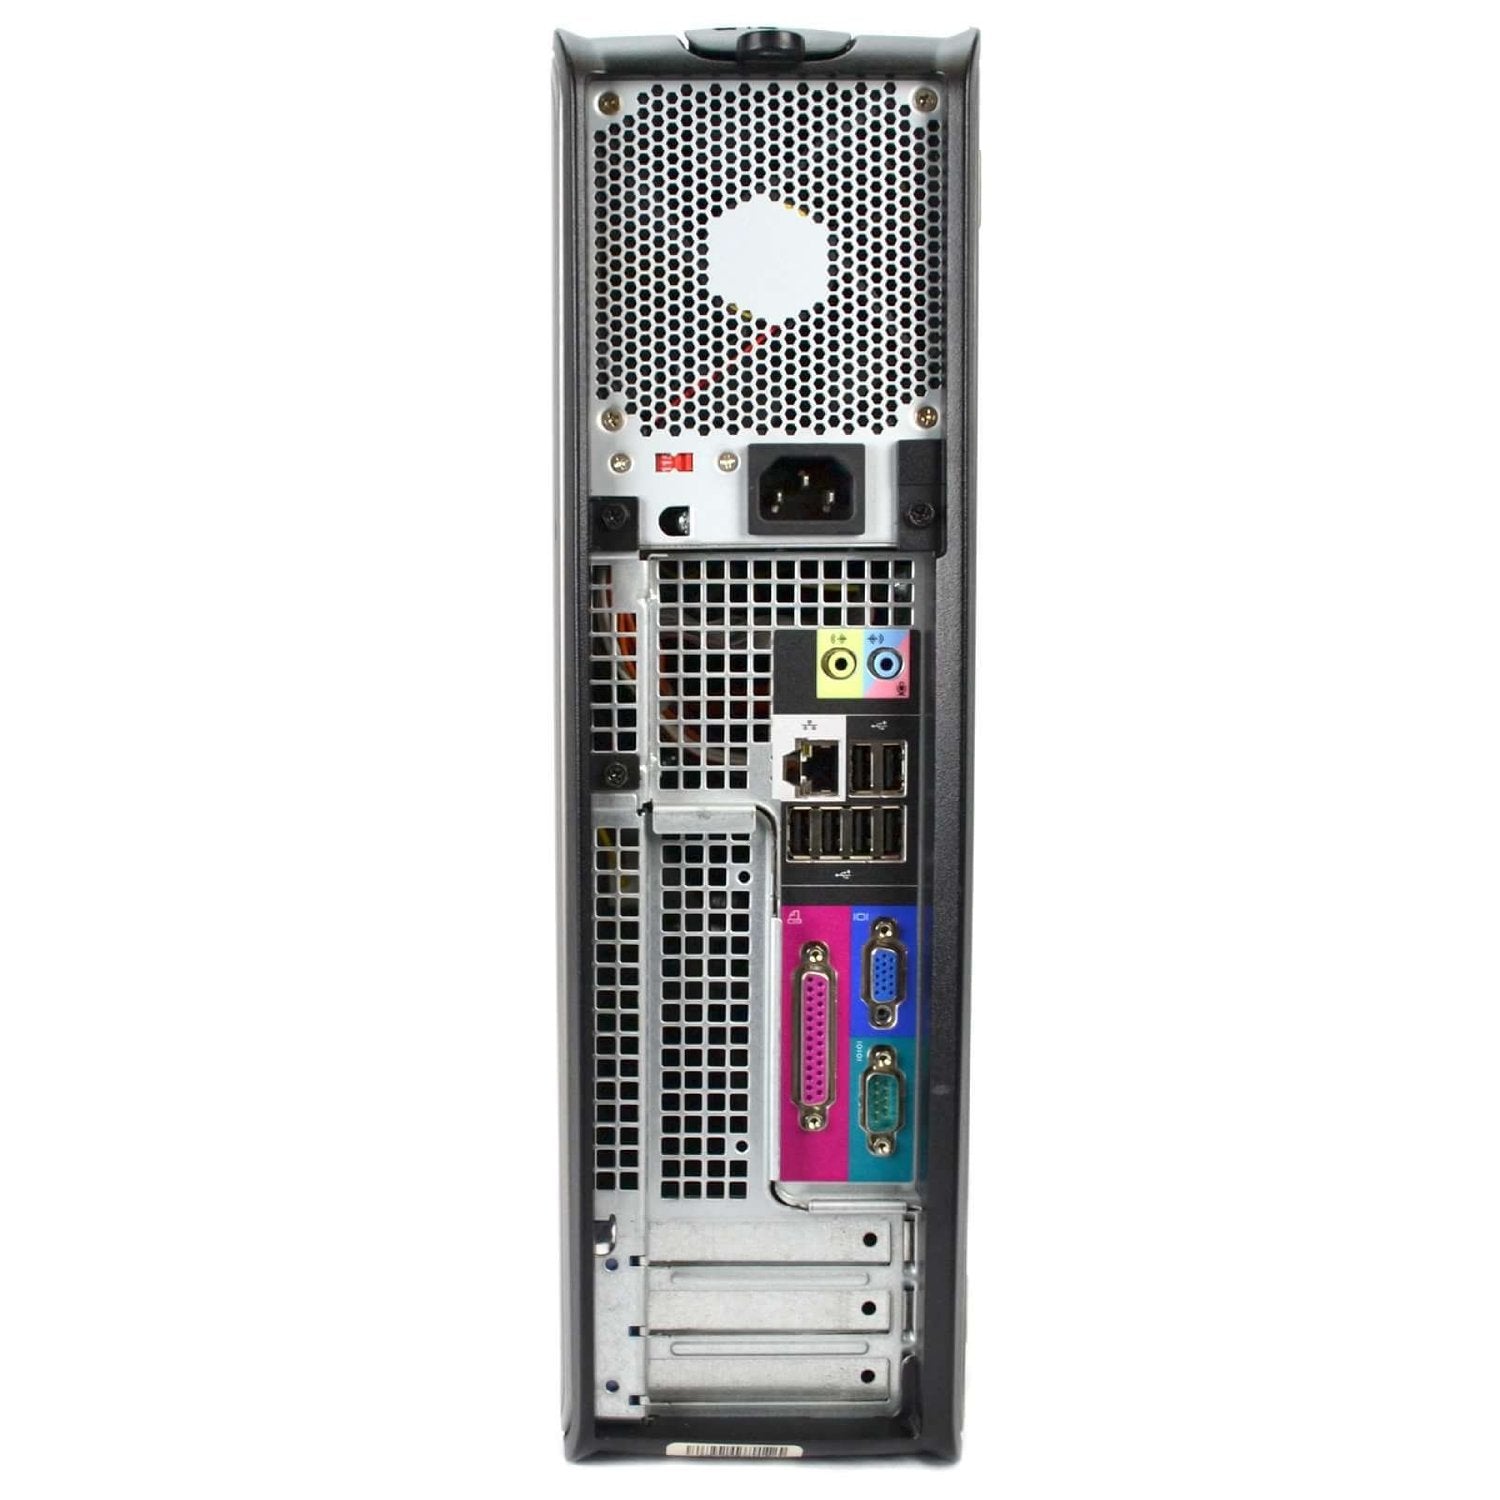 Dell Optiplex 3.3 GHz Core 2 Duo PC, 6GB, 500 GB HDD, Windows 10 Home x64, USB Mouse & Keyboard